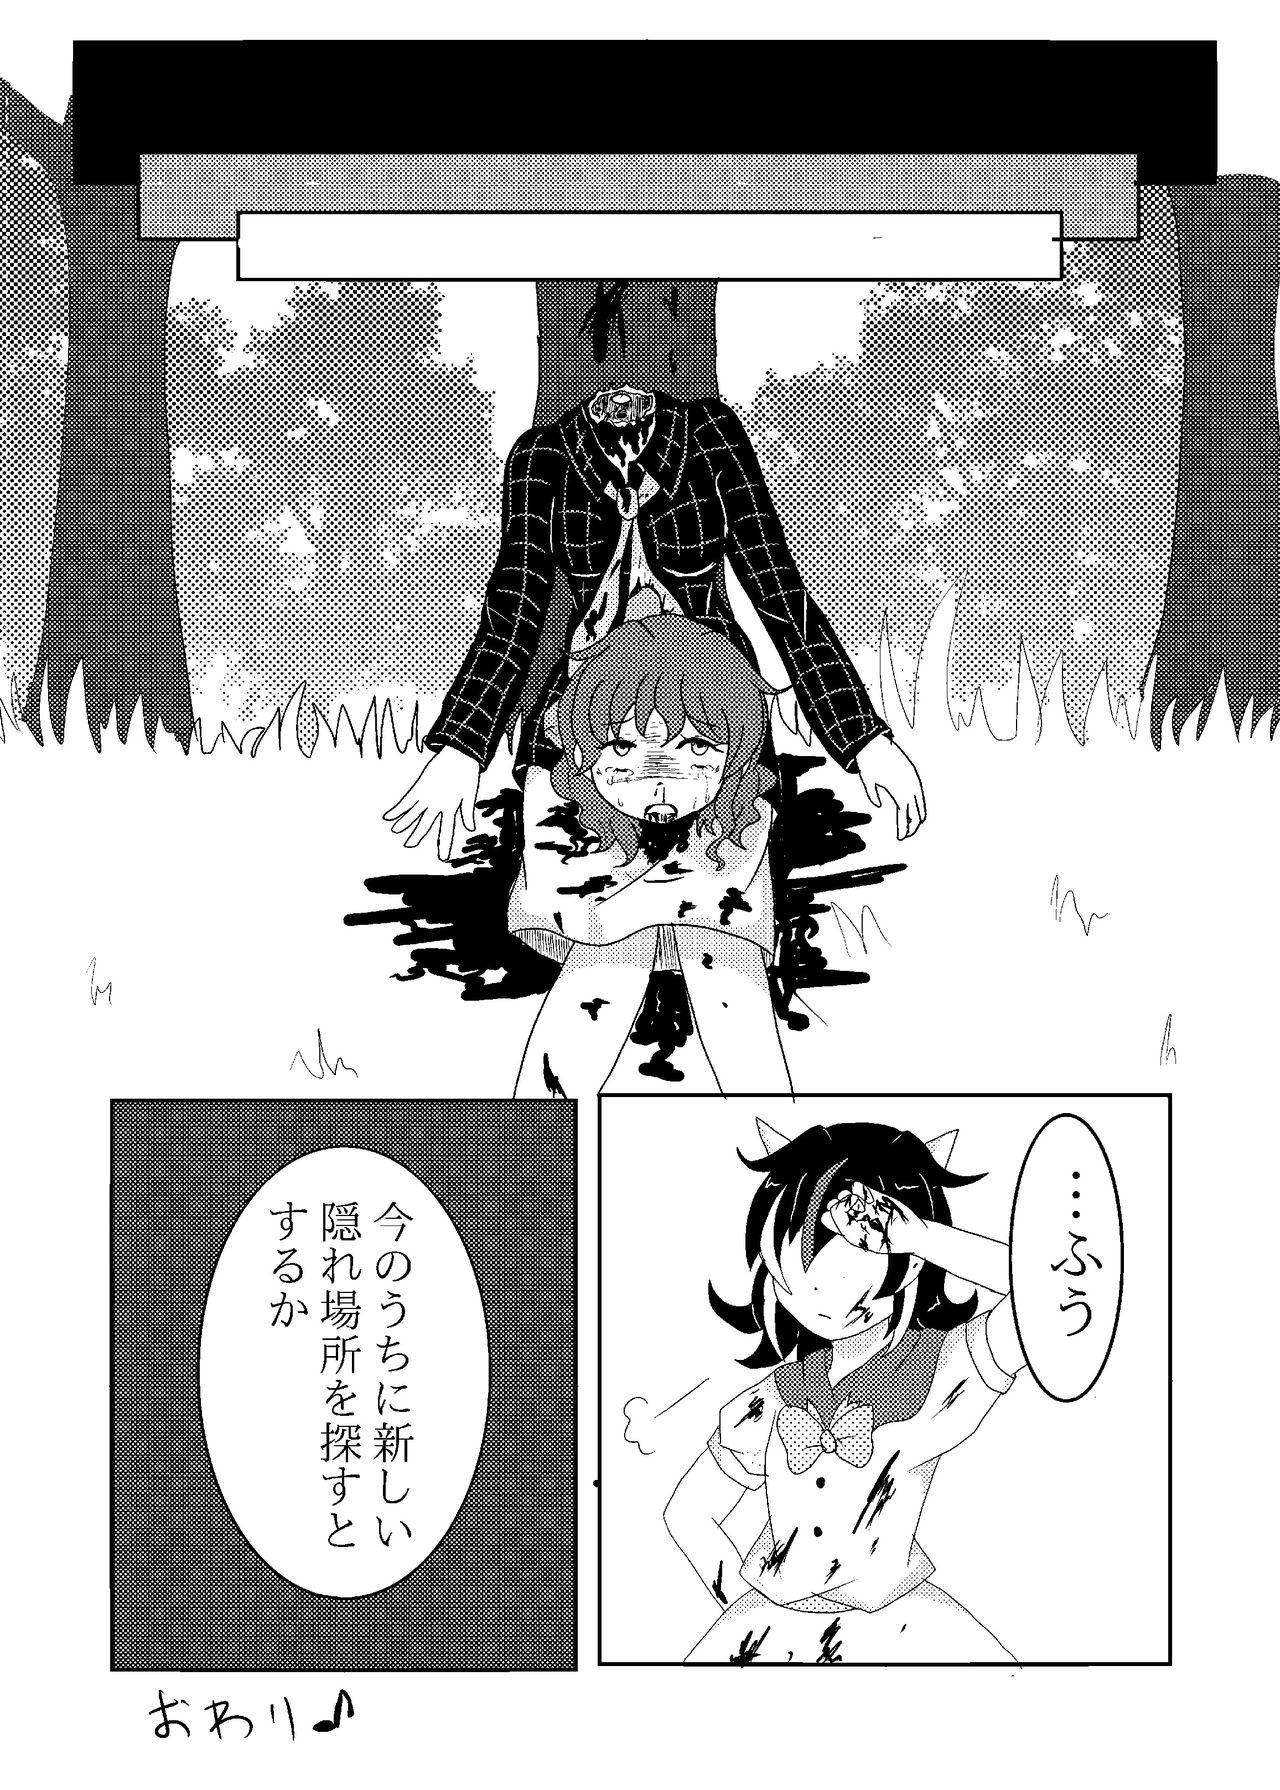 Milfporn IN THE RIGHT WAY - Touhou project Show - Page 8